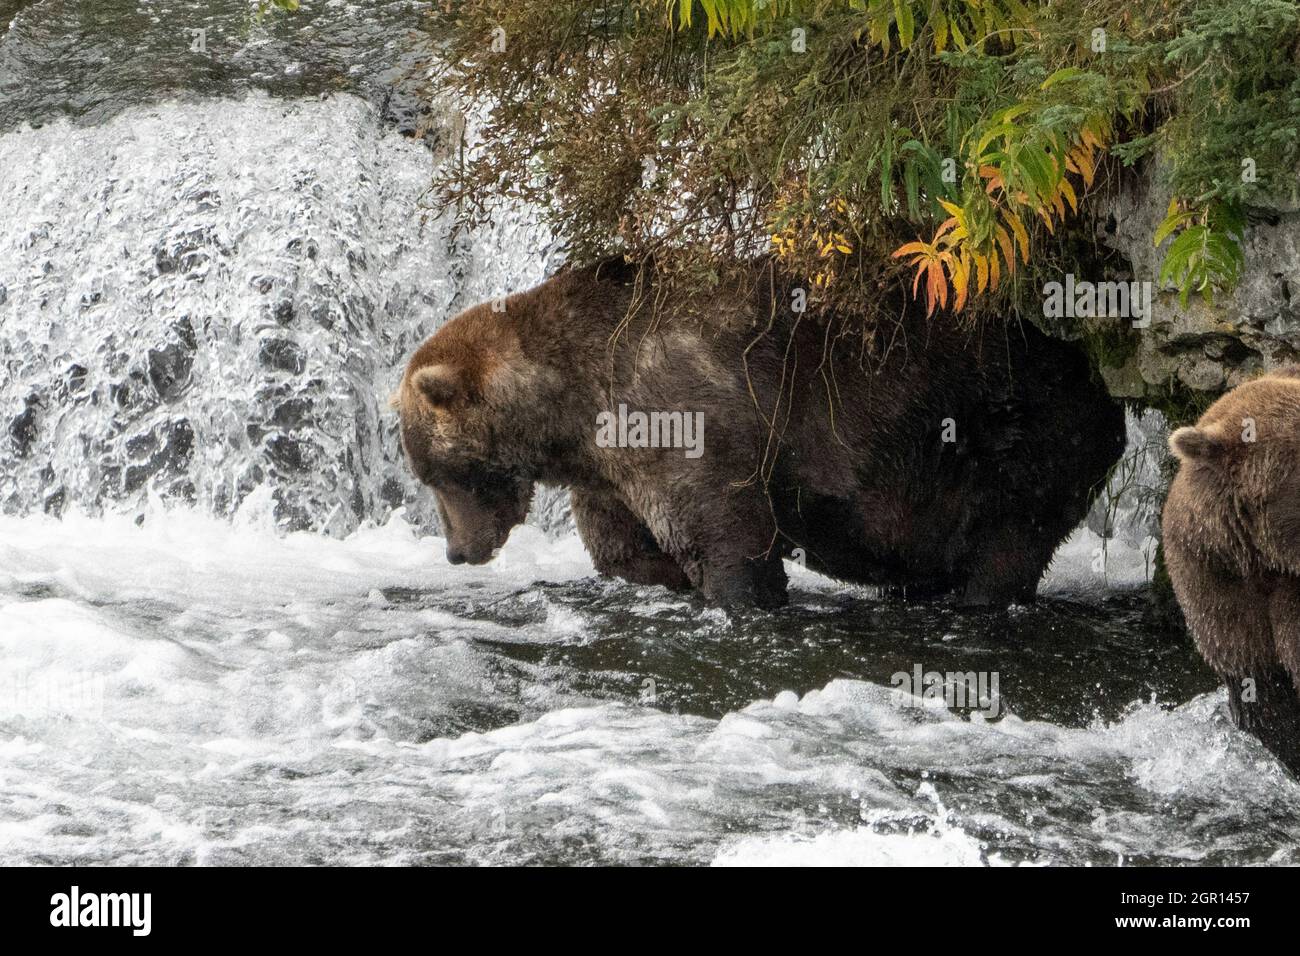 An adult Brown Bear known as Otis 480 watches for a Sockeye Salmon at Brooks Falls in Katmai National Park and Preserve September 16, 2021 near King Salmon, Alaska. The park is holding the annual Fat Bear contest to decide which bear gained the most weight during the summer feeding season. Stock Photo